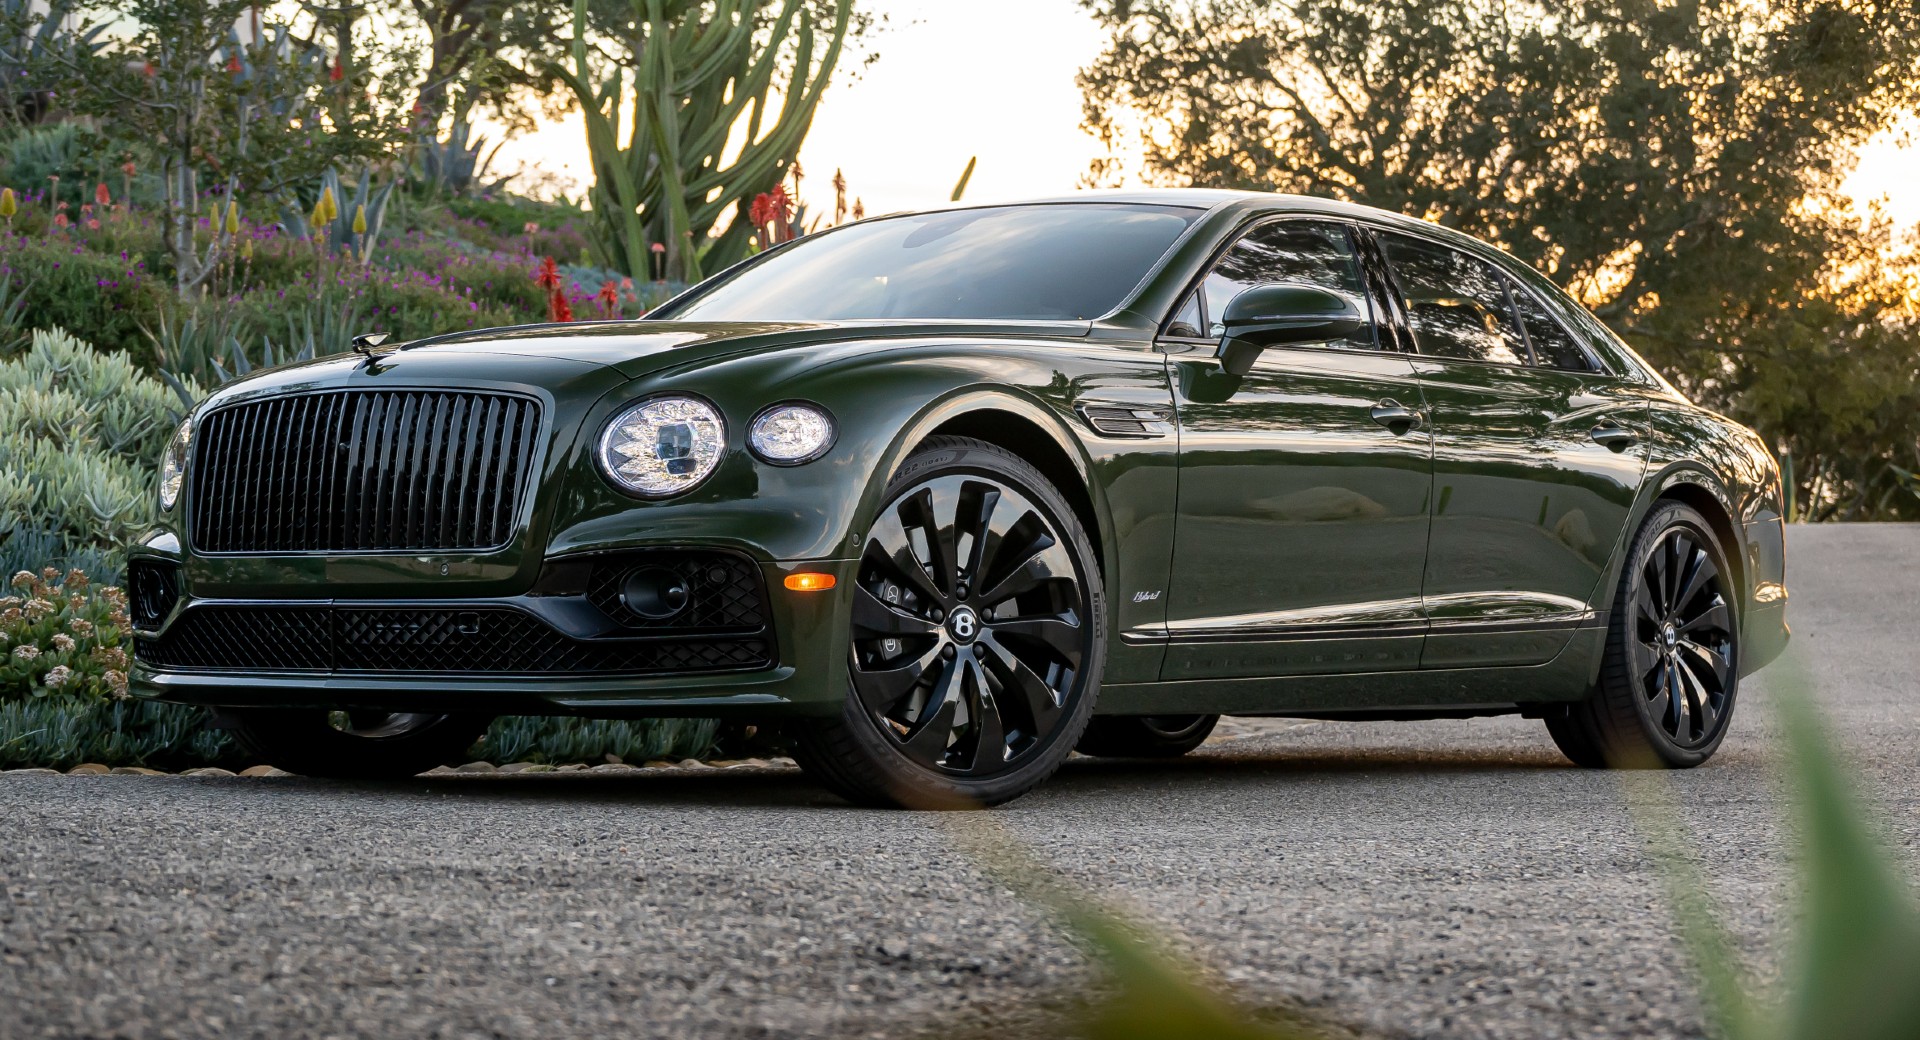 New Flying Spur Hybrid Is Officially Bentley's Cleanest And Most Efficient  Model To Date | Carscoops